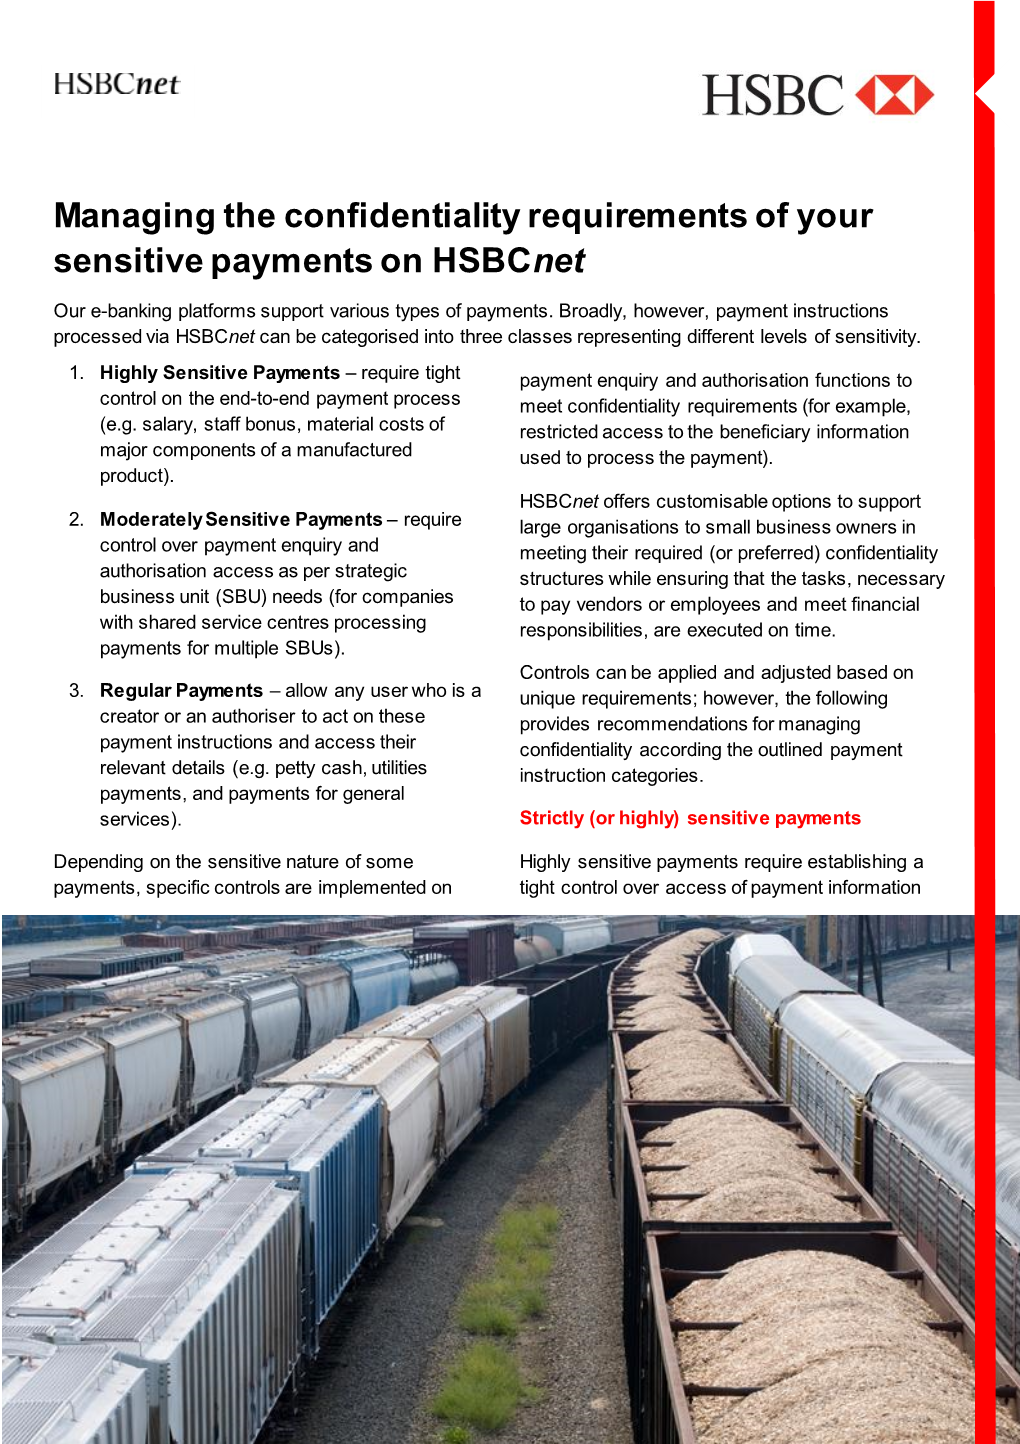 Managing the Confidentiality Requirements of Your Sensitive Payments on Hsbcnet